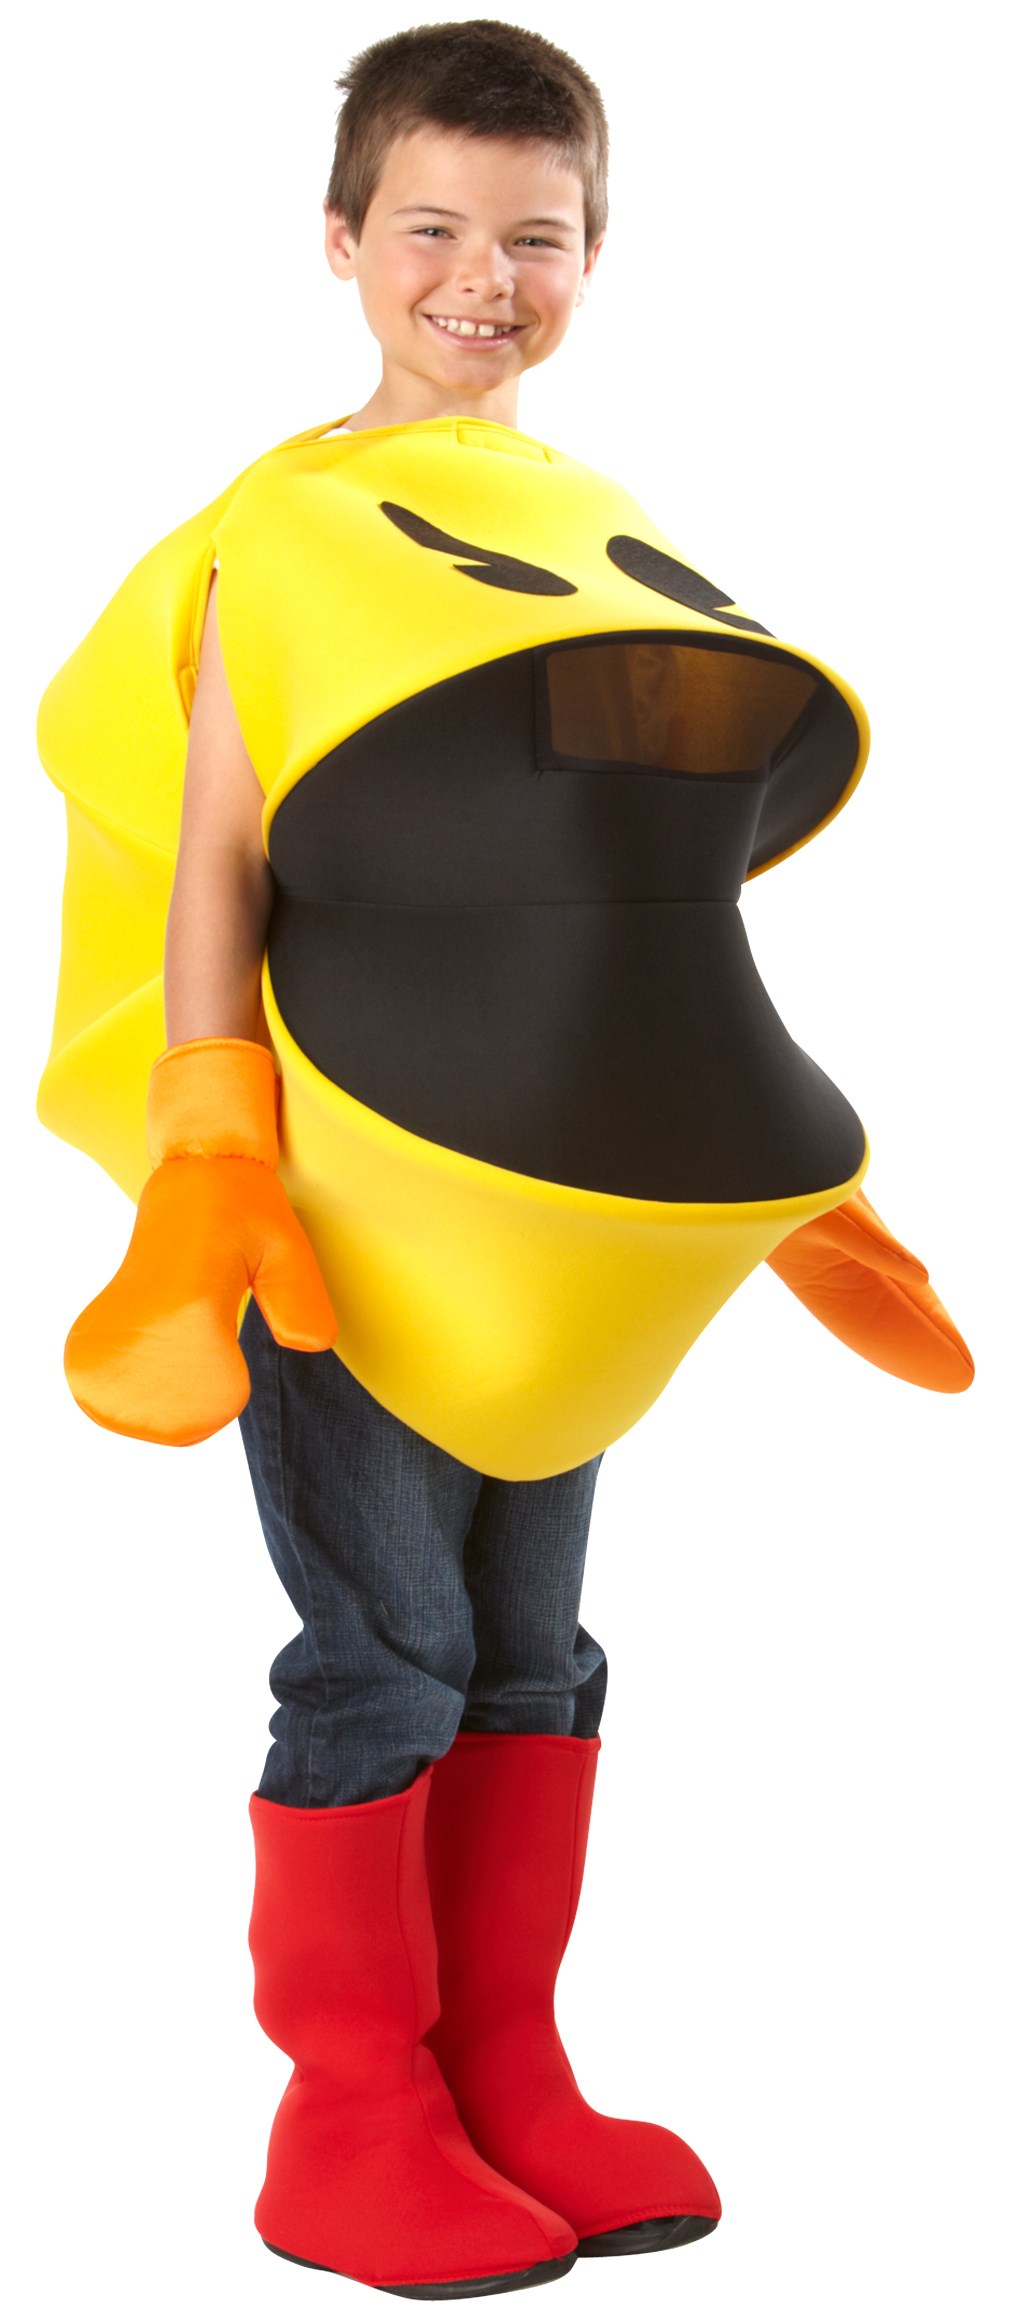 Pac-Man Deluxe Child Costume